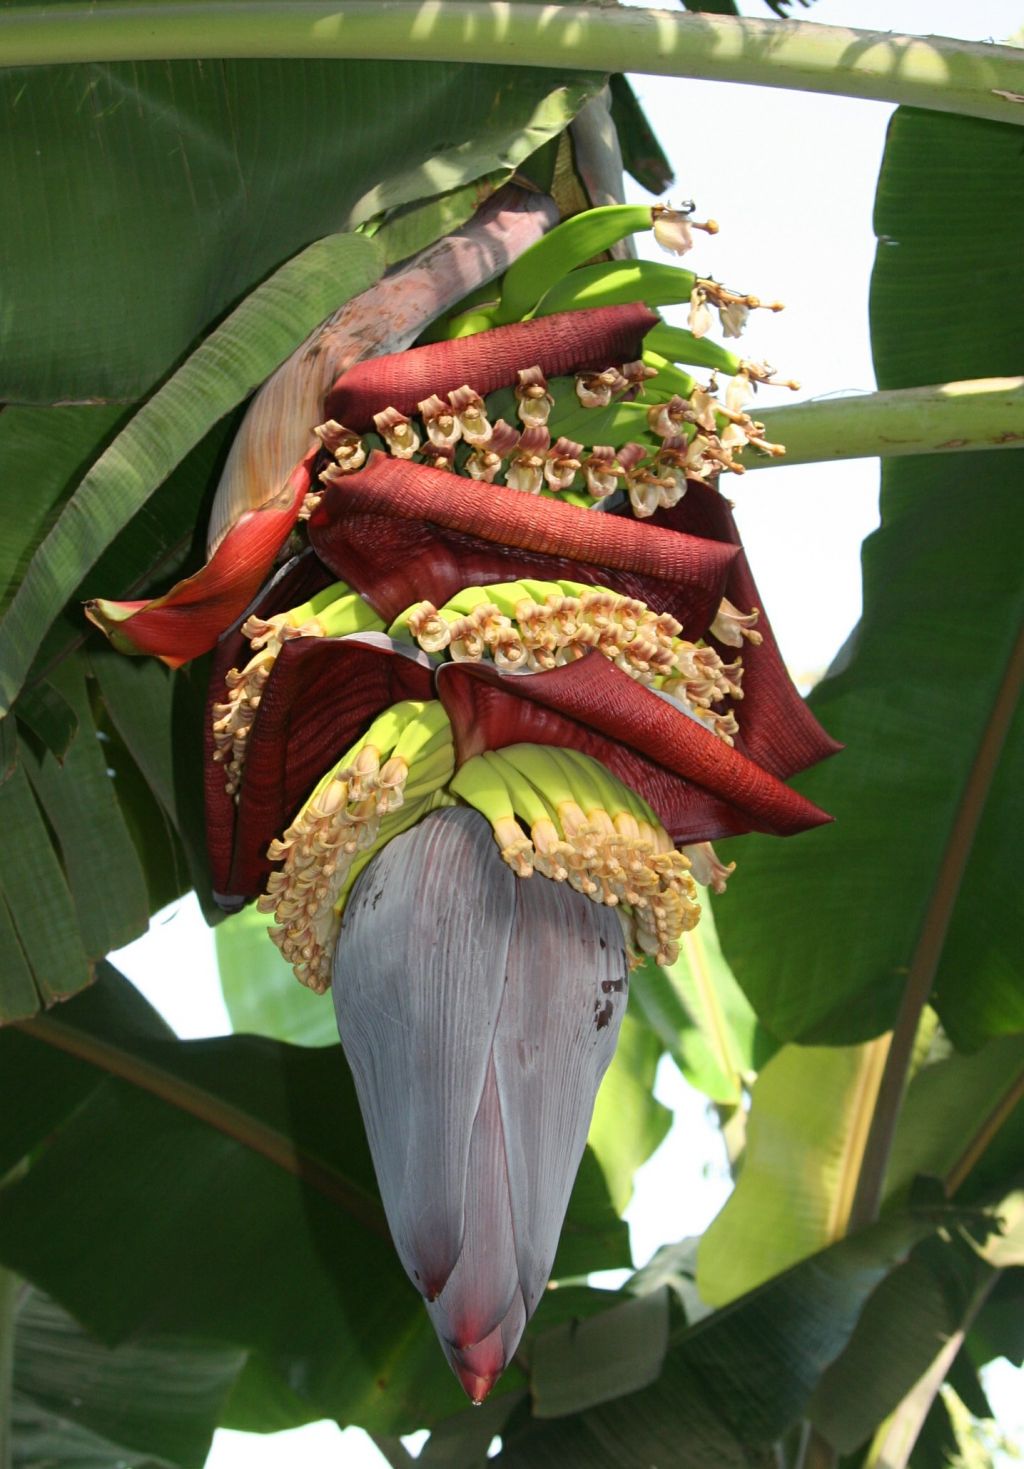 ﻿Waste banana plant (Musa sp.) Trunks as an Alternative source of pulp for paper making Essay